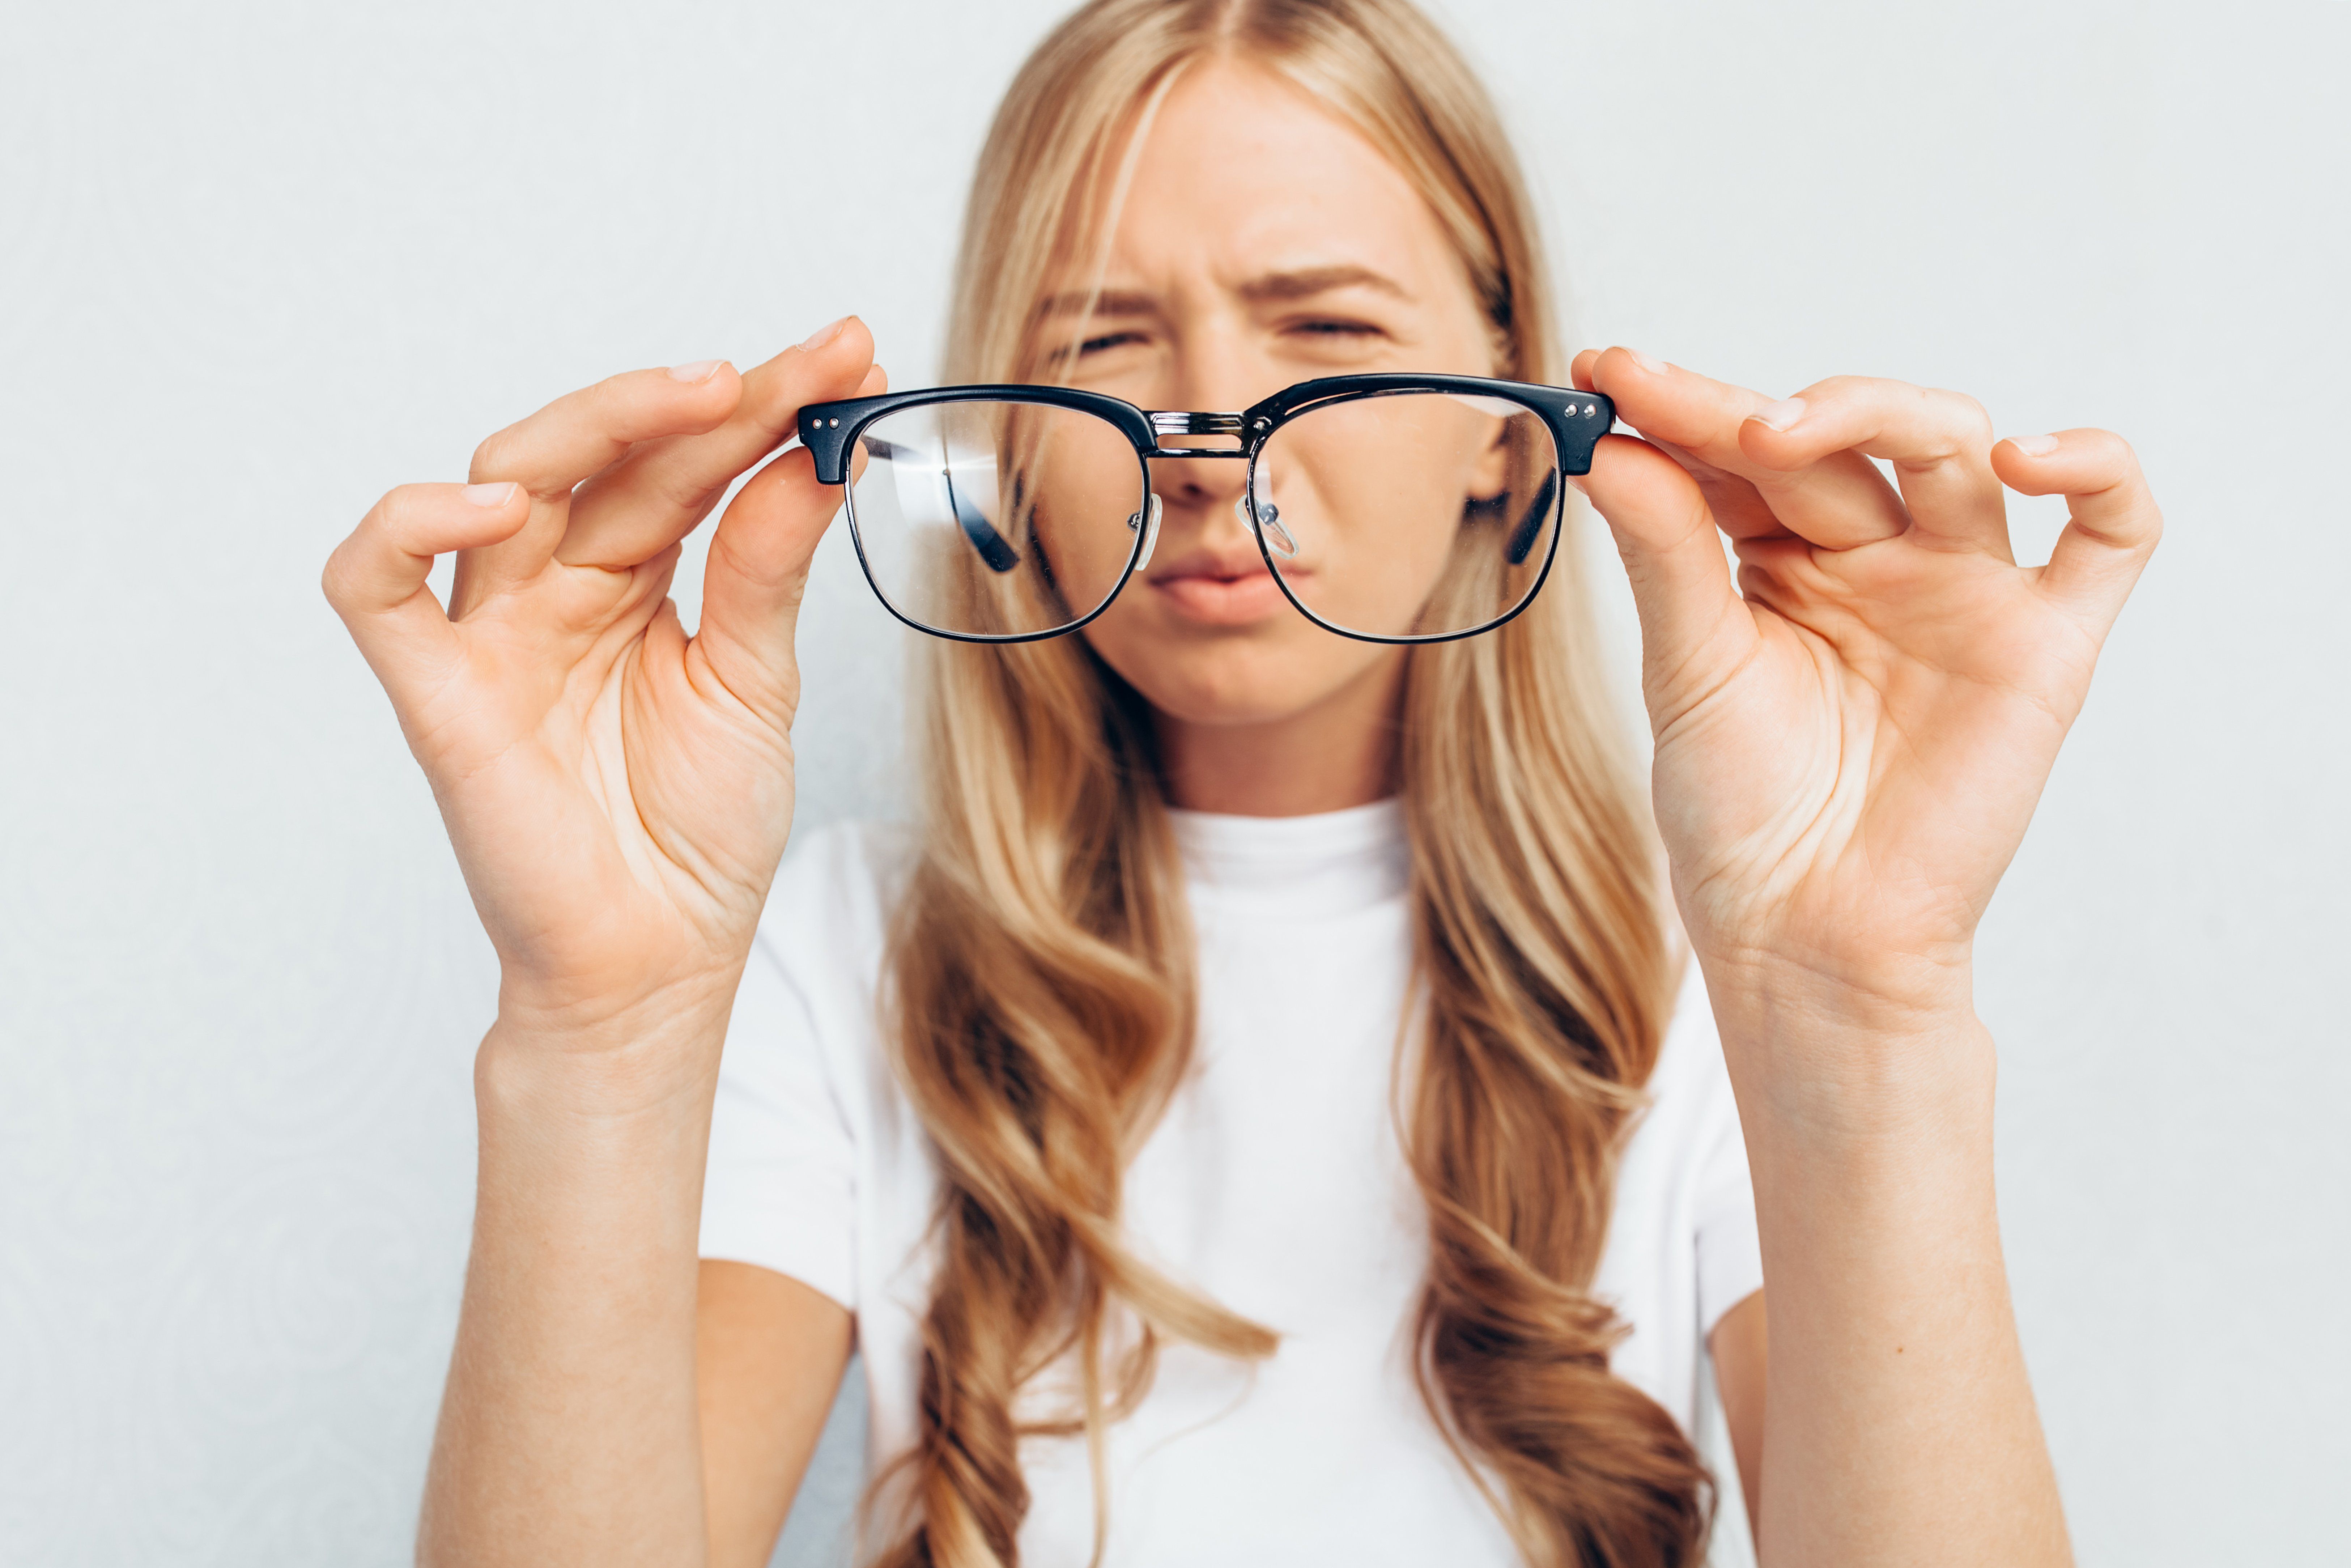 The 5 Best Ways to Stop Eyesight From Getting Worse